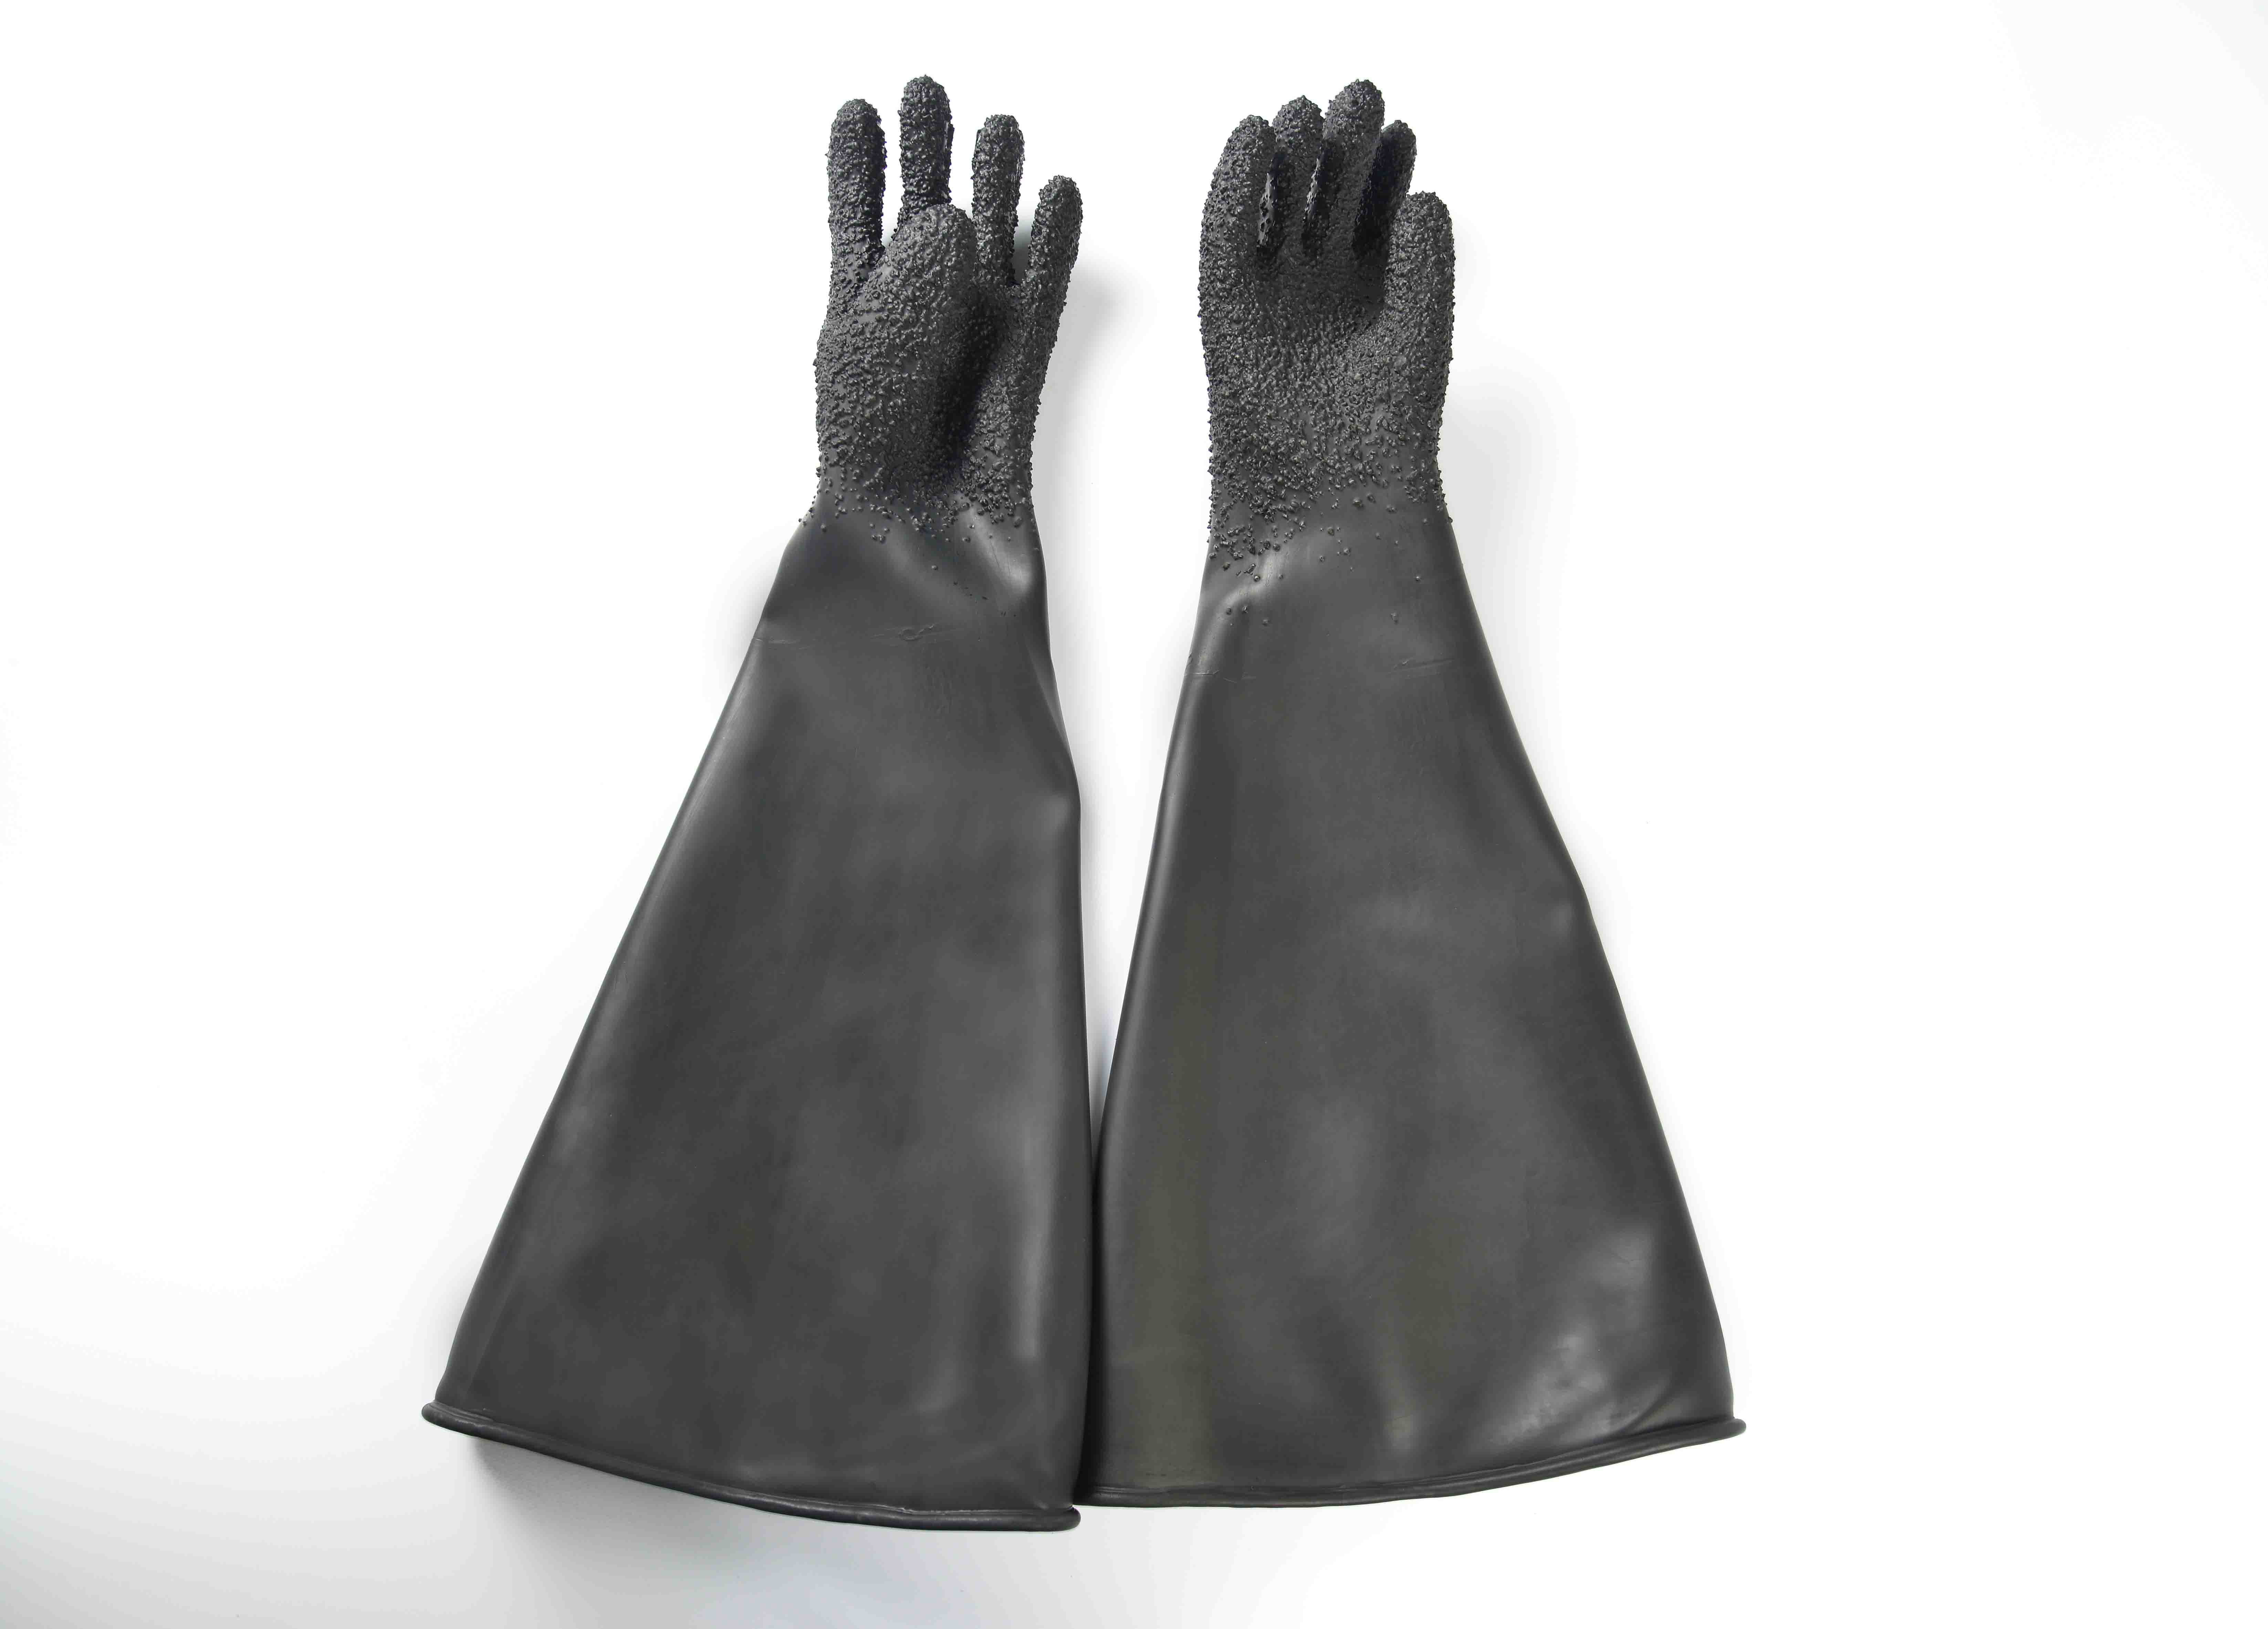 Hot new products 26″ Industrial rubber glove-Granule finish Rio de Janeiro Factory